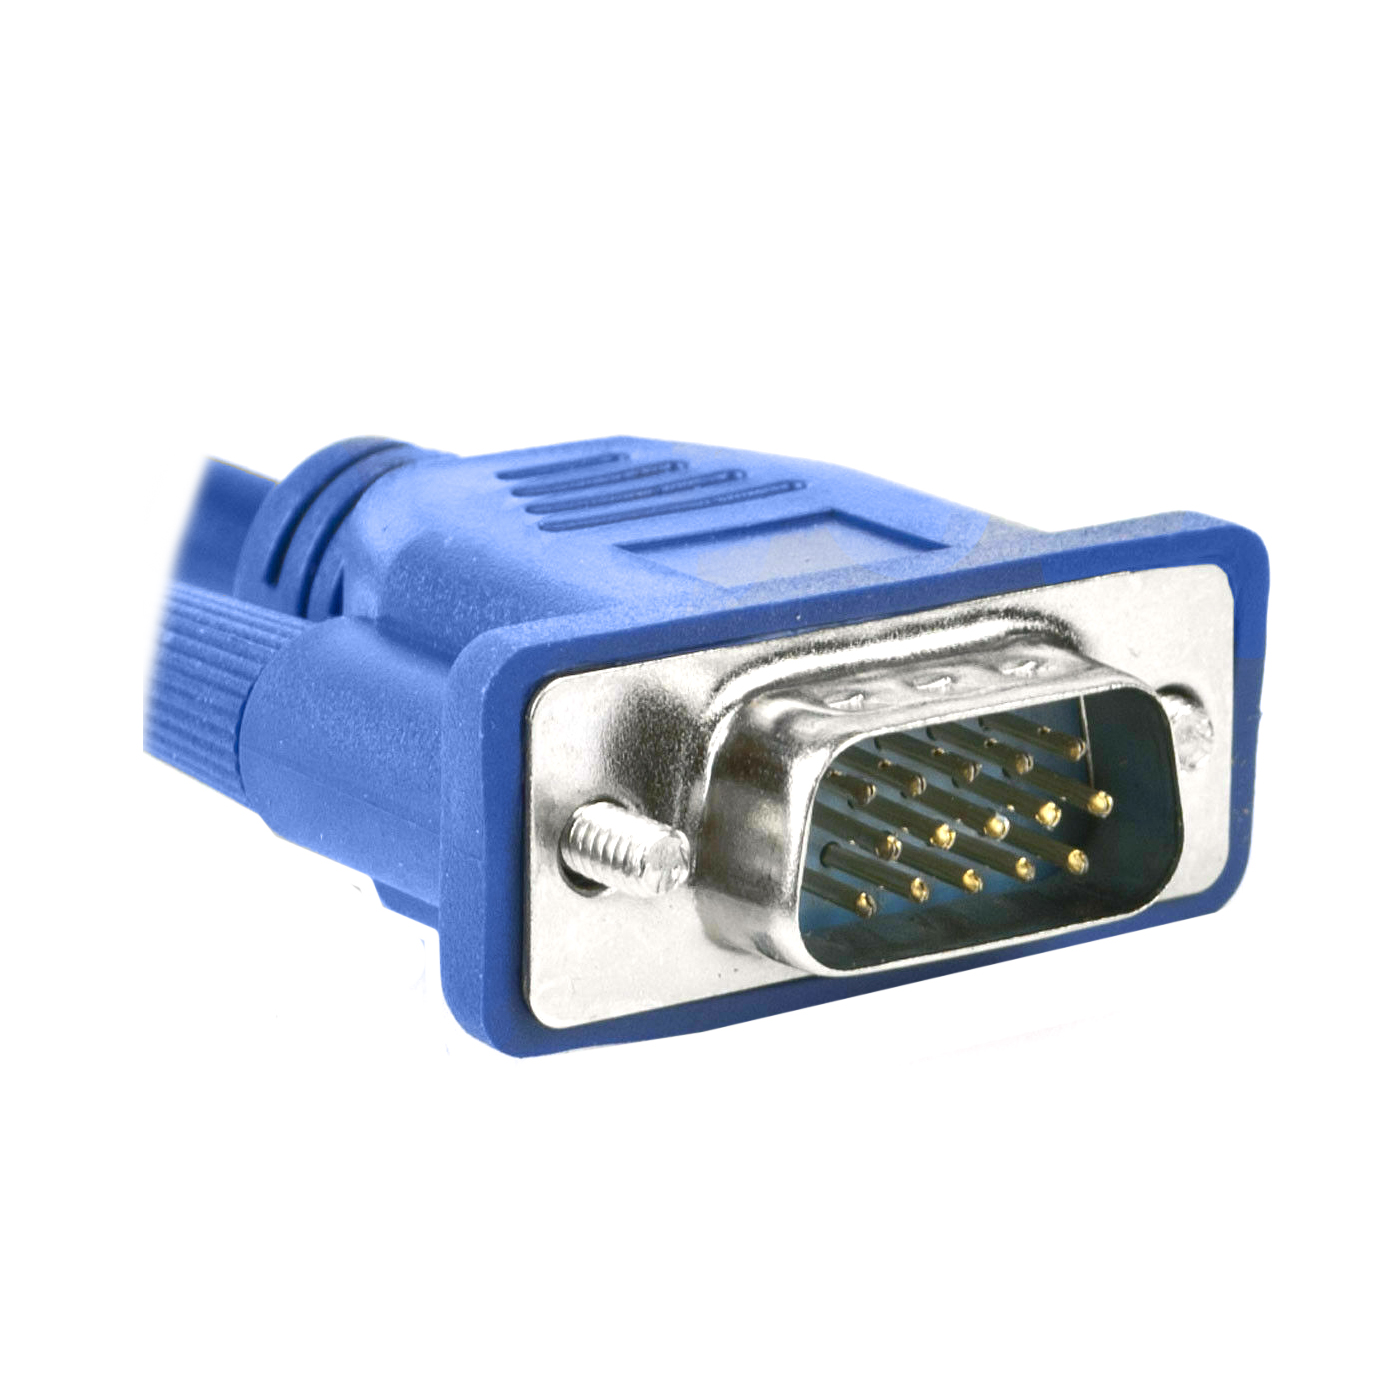 Analog Video Signal Output 1.5m Normal Quality VGA 15Pin Male to VGA 15Pin Male Cable for CRT Monitor. 